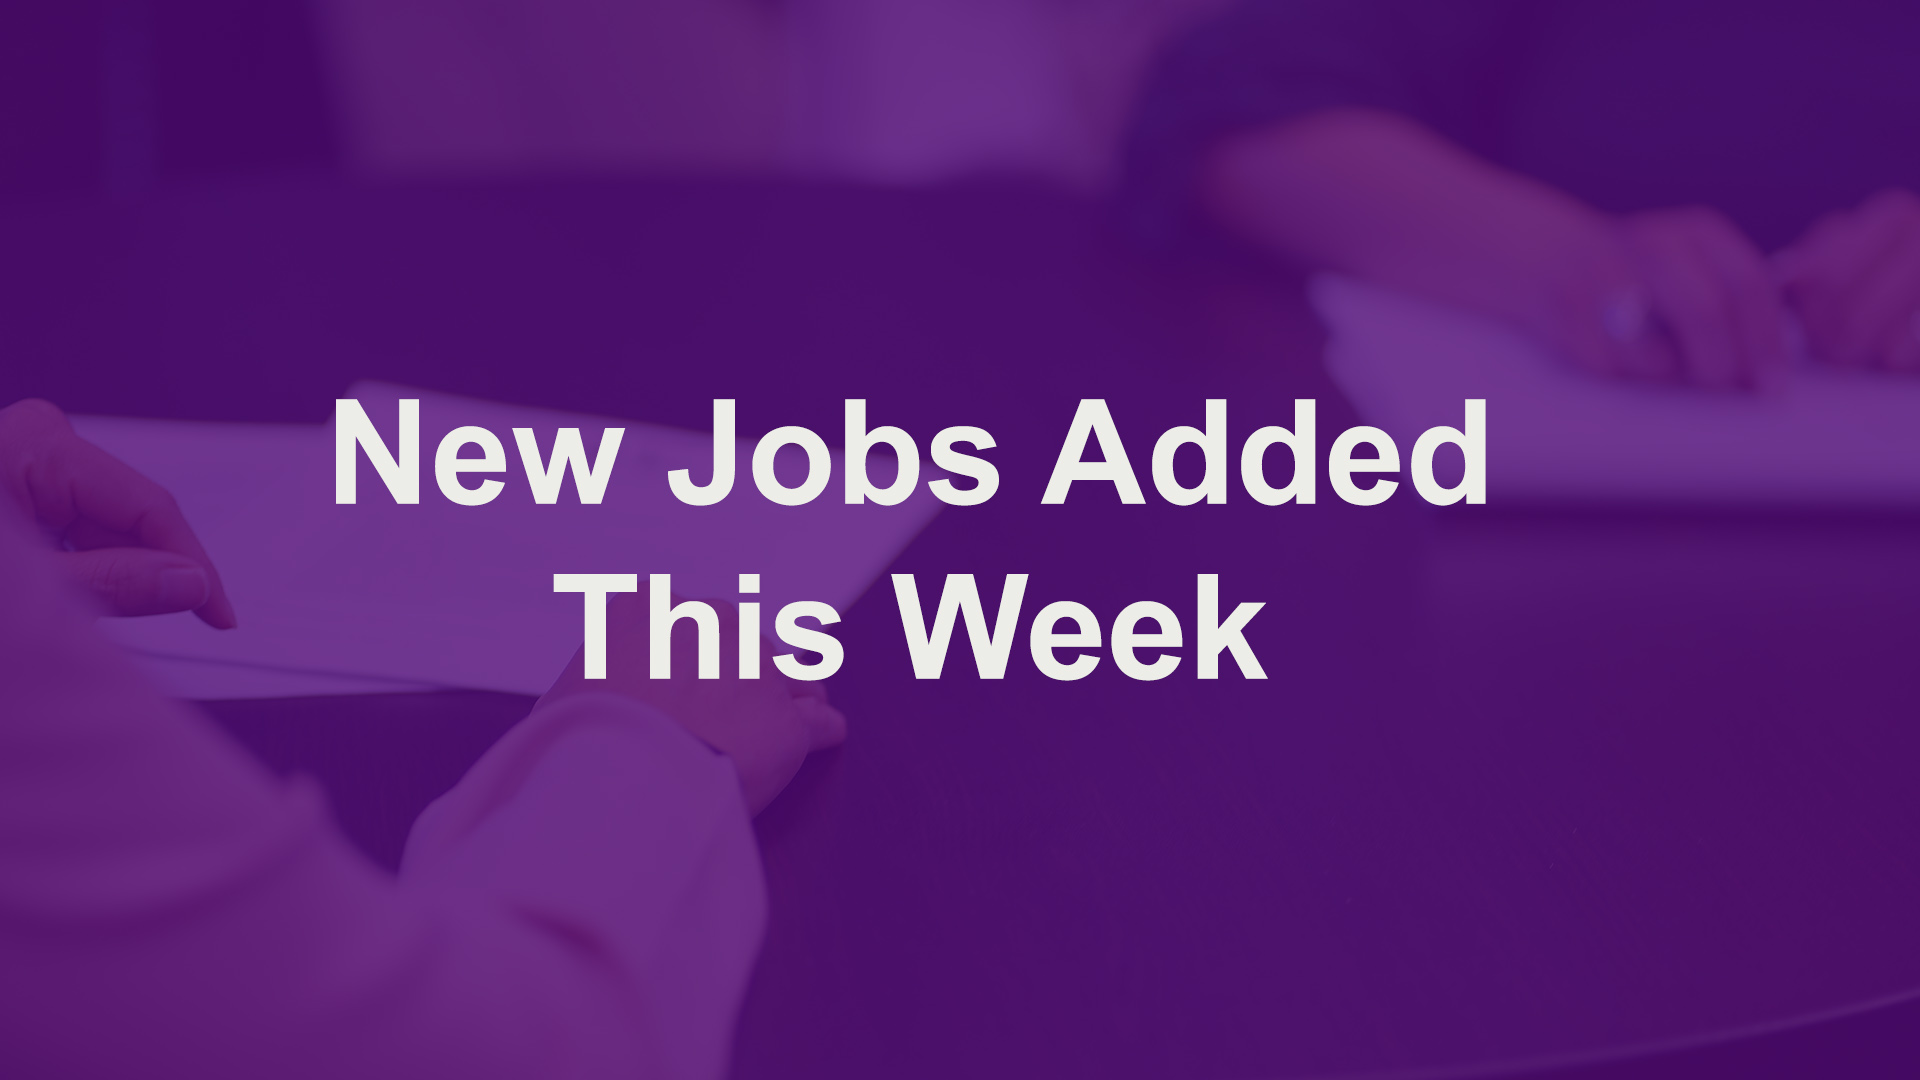 New Jobs Added This Week